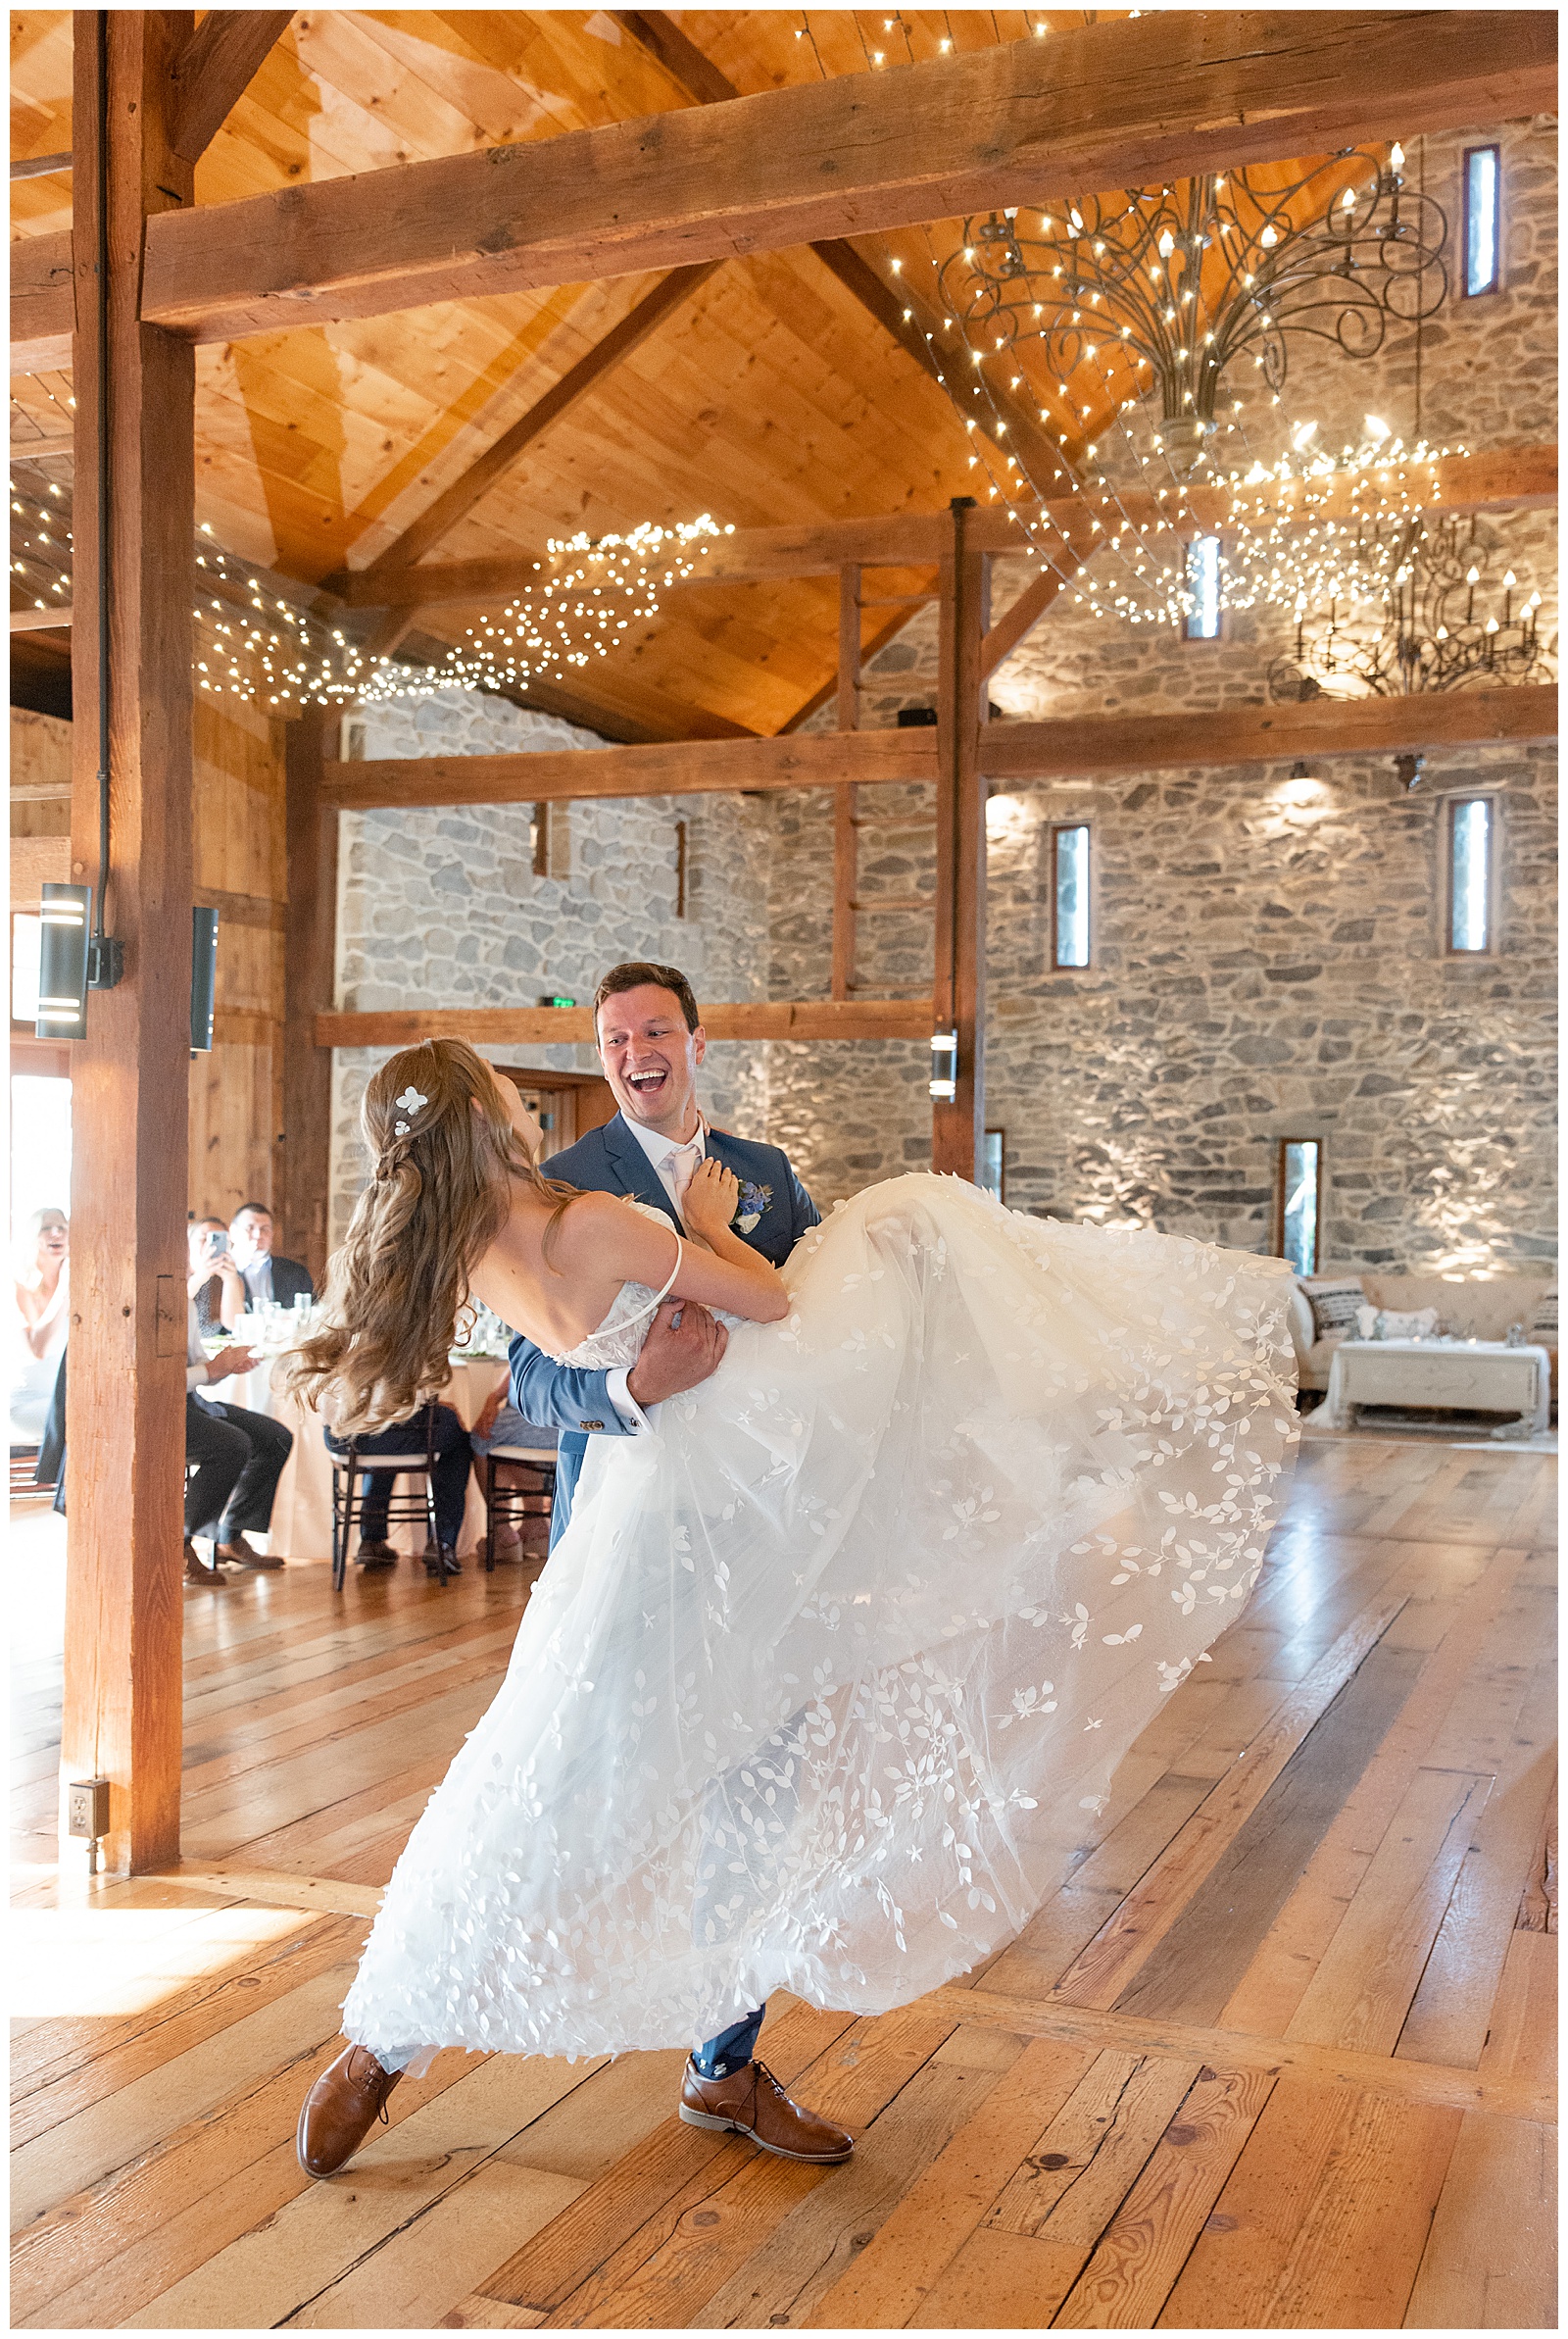 groom lifting his bride and swinging her on the dance floor inside stunning barn reception at the barn at silverstone